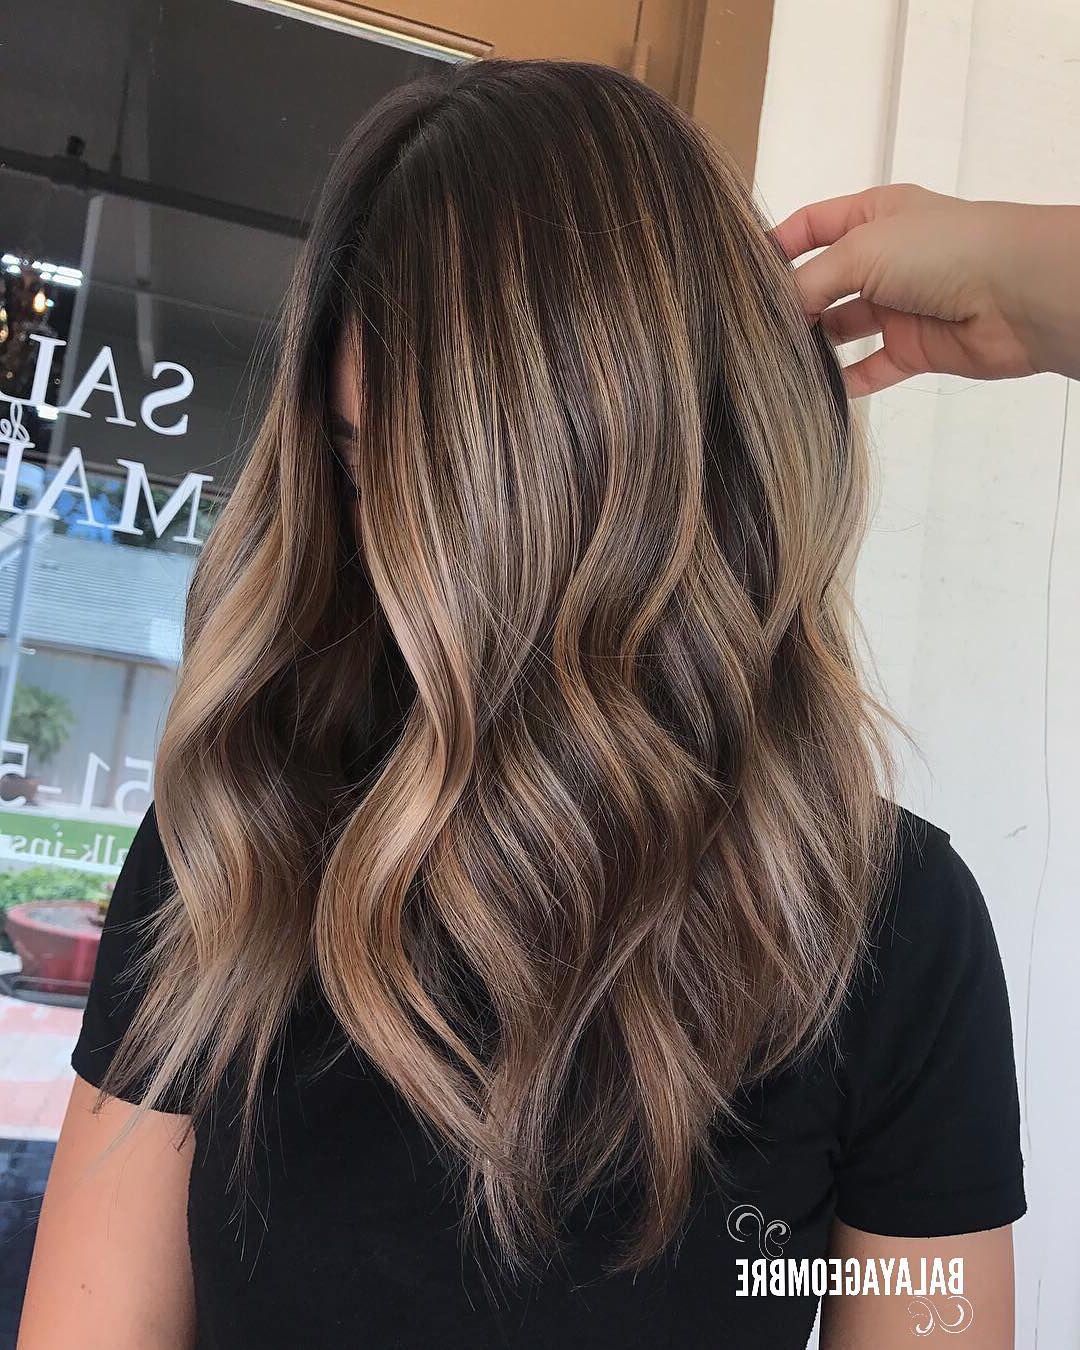 Favorite Smooth Layers For Long Hairstyles Throughout 10 Best Medium Layered Hairstyles 2019 – Brown & Ash Blonde Fashion (View 11 of 20)